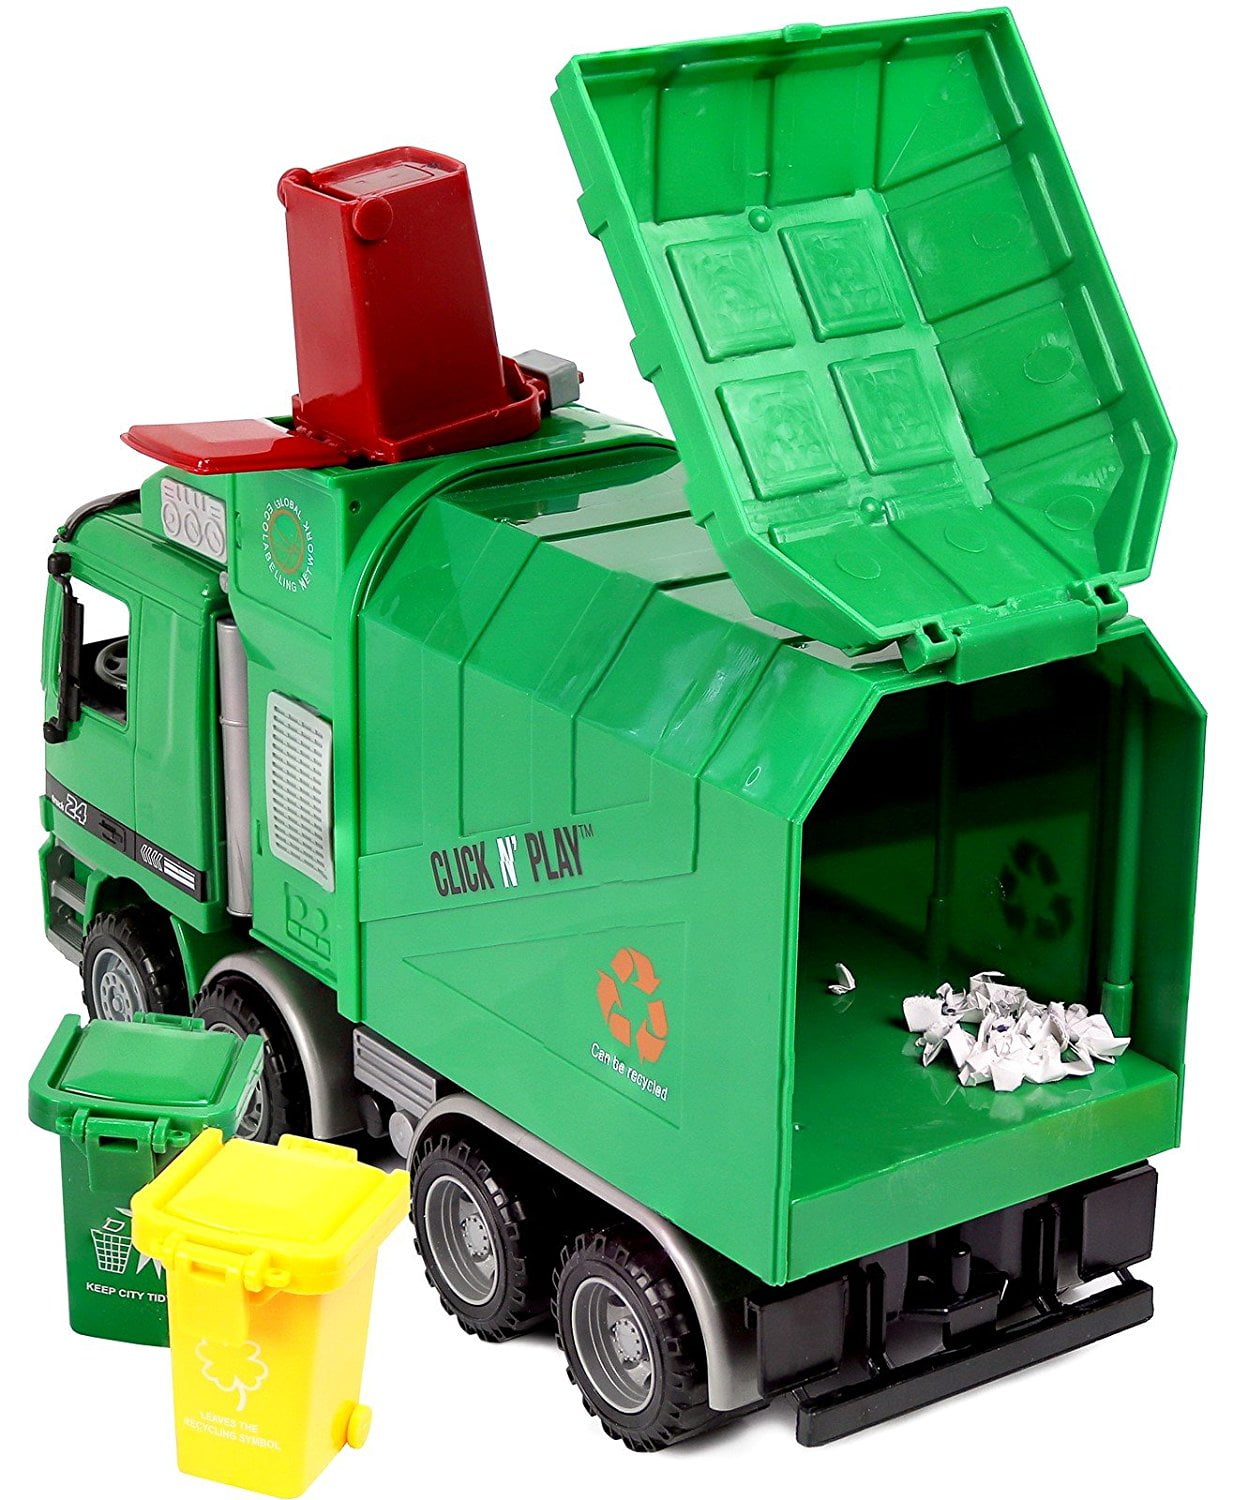 Click N' Play Friction Kids Garbage Truck Toy Recycle Vehicle Trash Can Bin Gift 